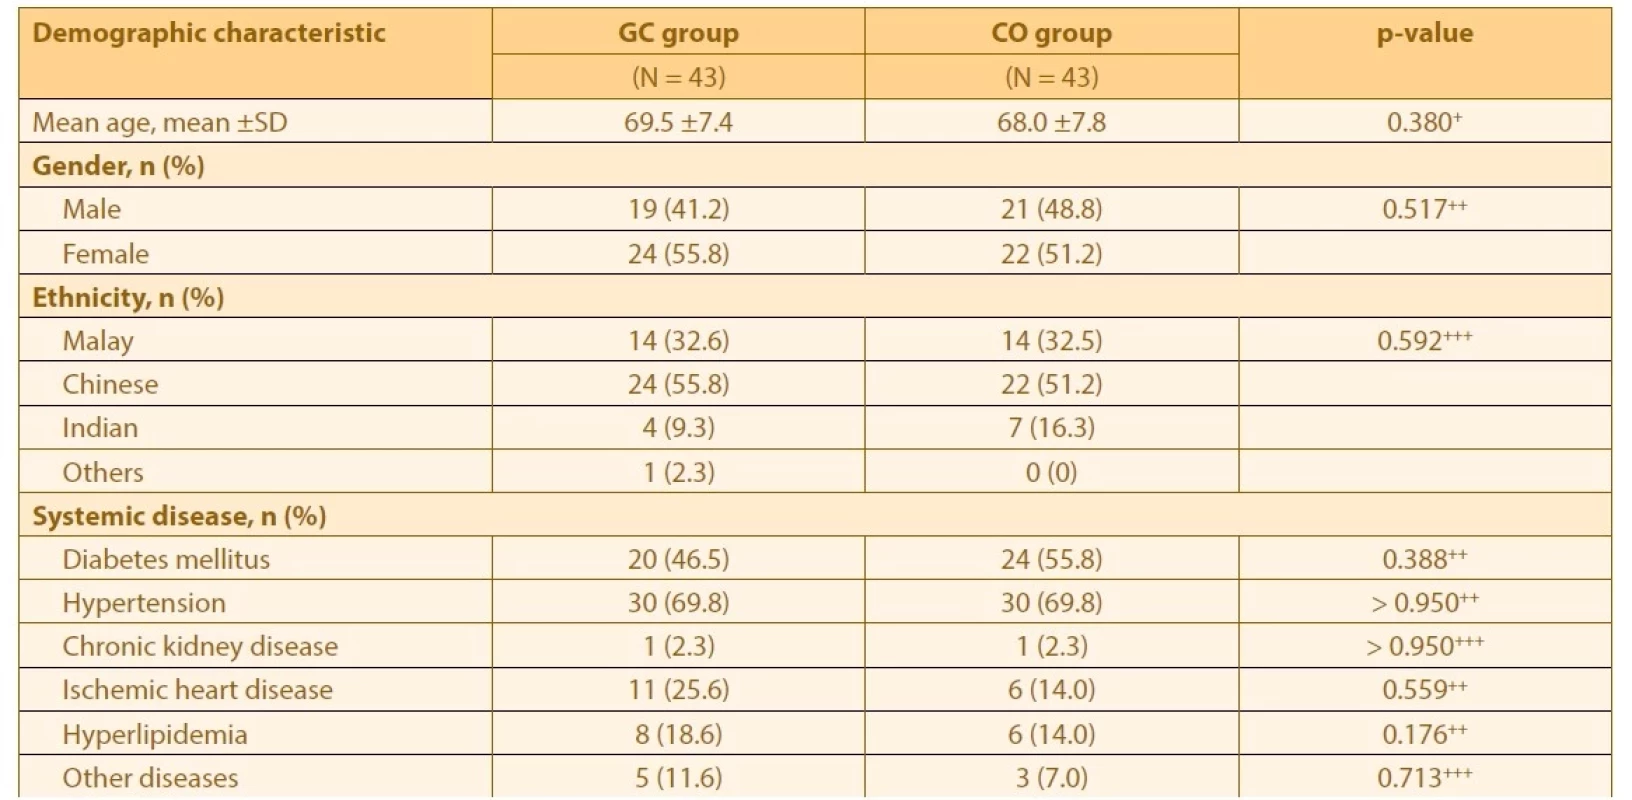 Comparison of demographic data between GC and CO groups